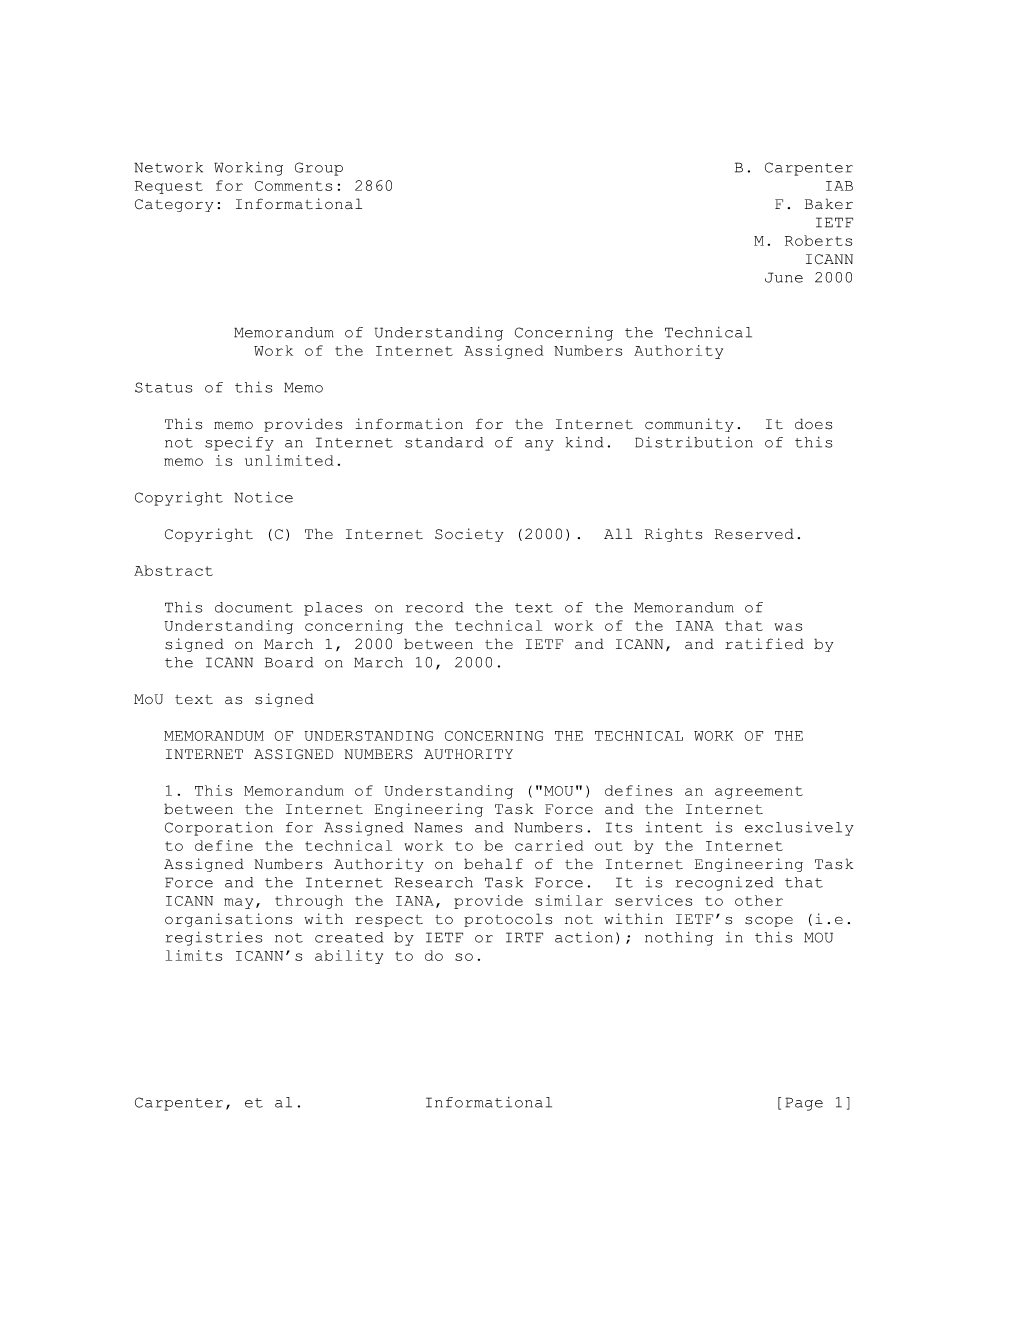 Network Working Group B. Carpenter Request for Comments: 2860 IAB Category: Informational F. Baker IETF M. Roberts ICANN June 2000